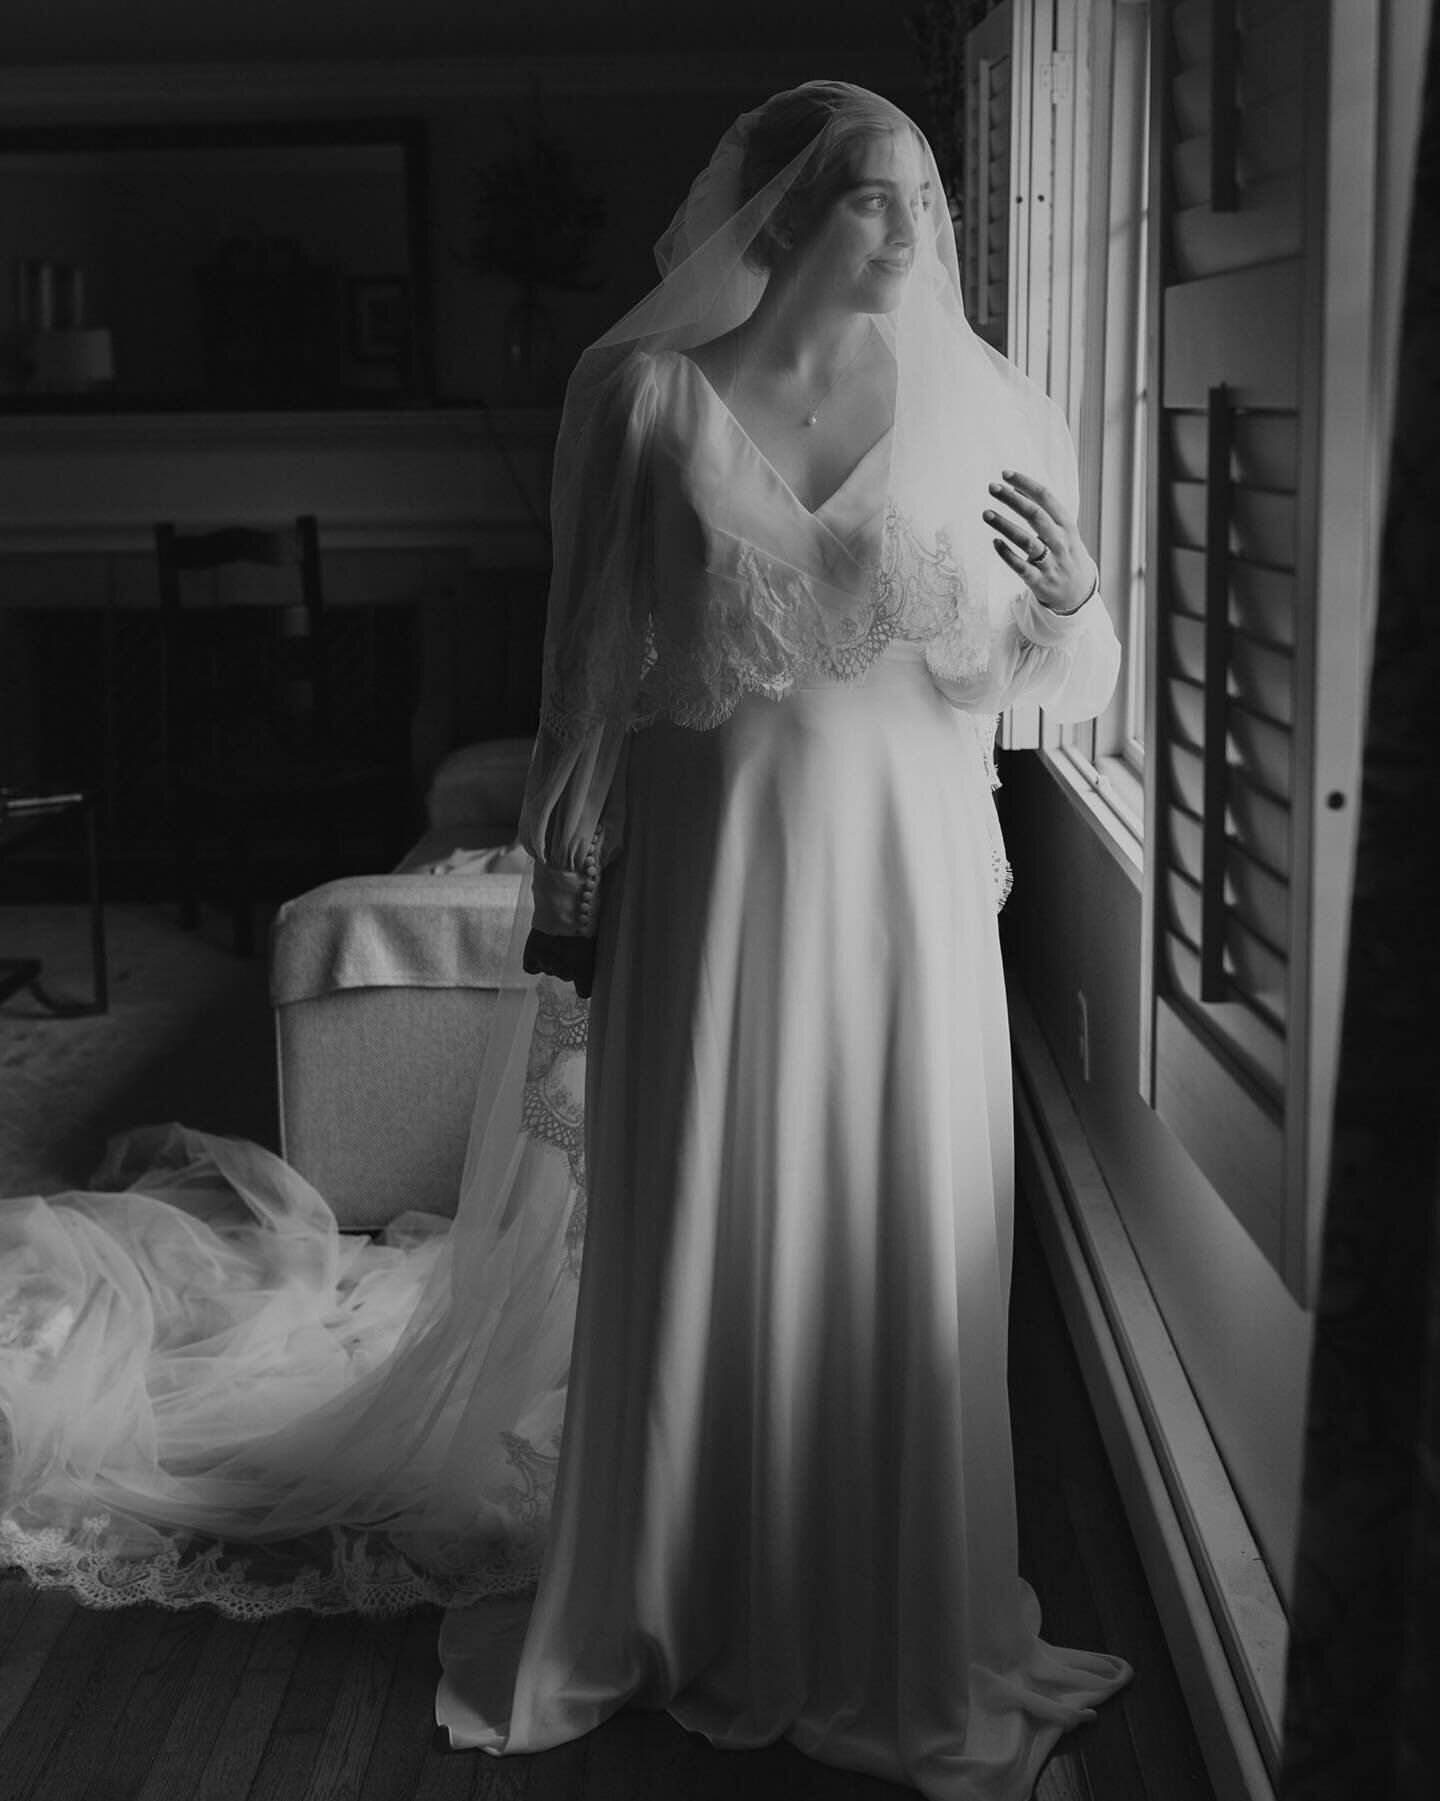 Beautiful Rainey in all her bridal glory. 

When perfect window light, a duster veil, and a beautiful bride make everything just magic.